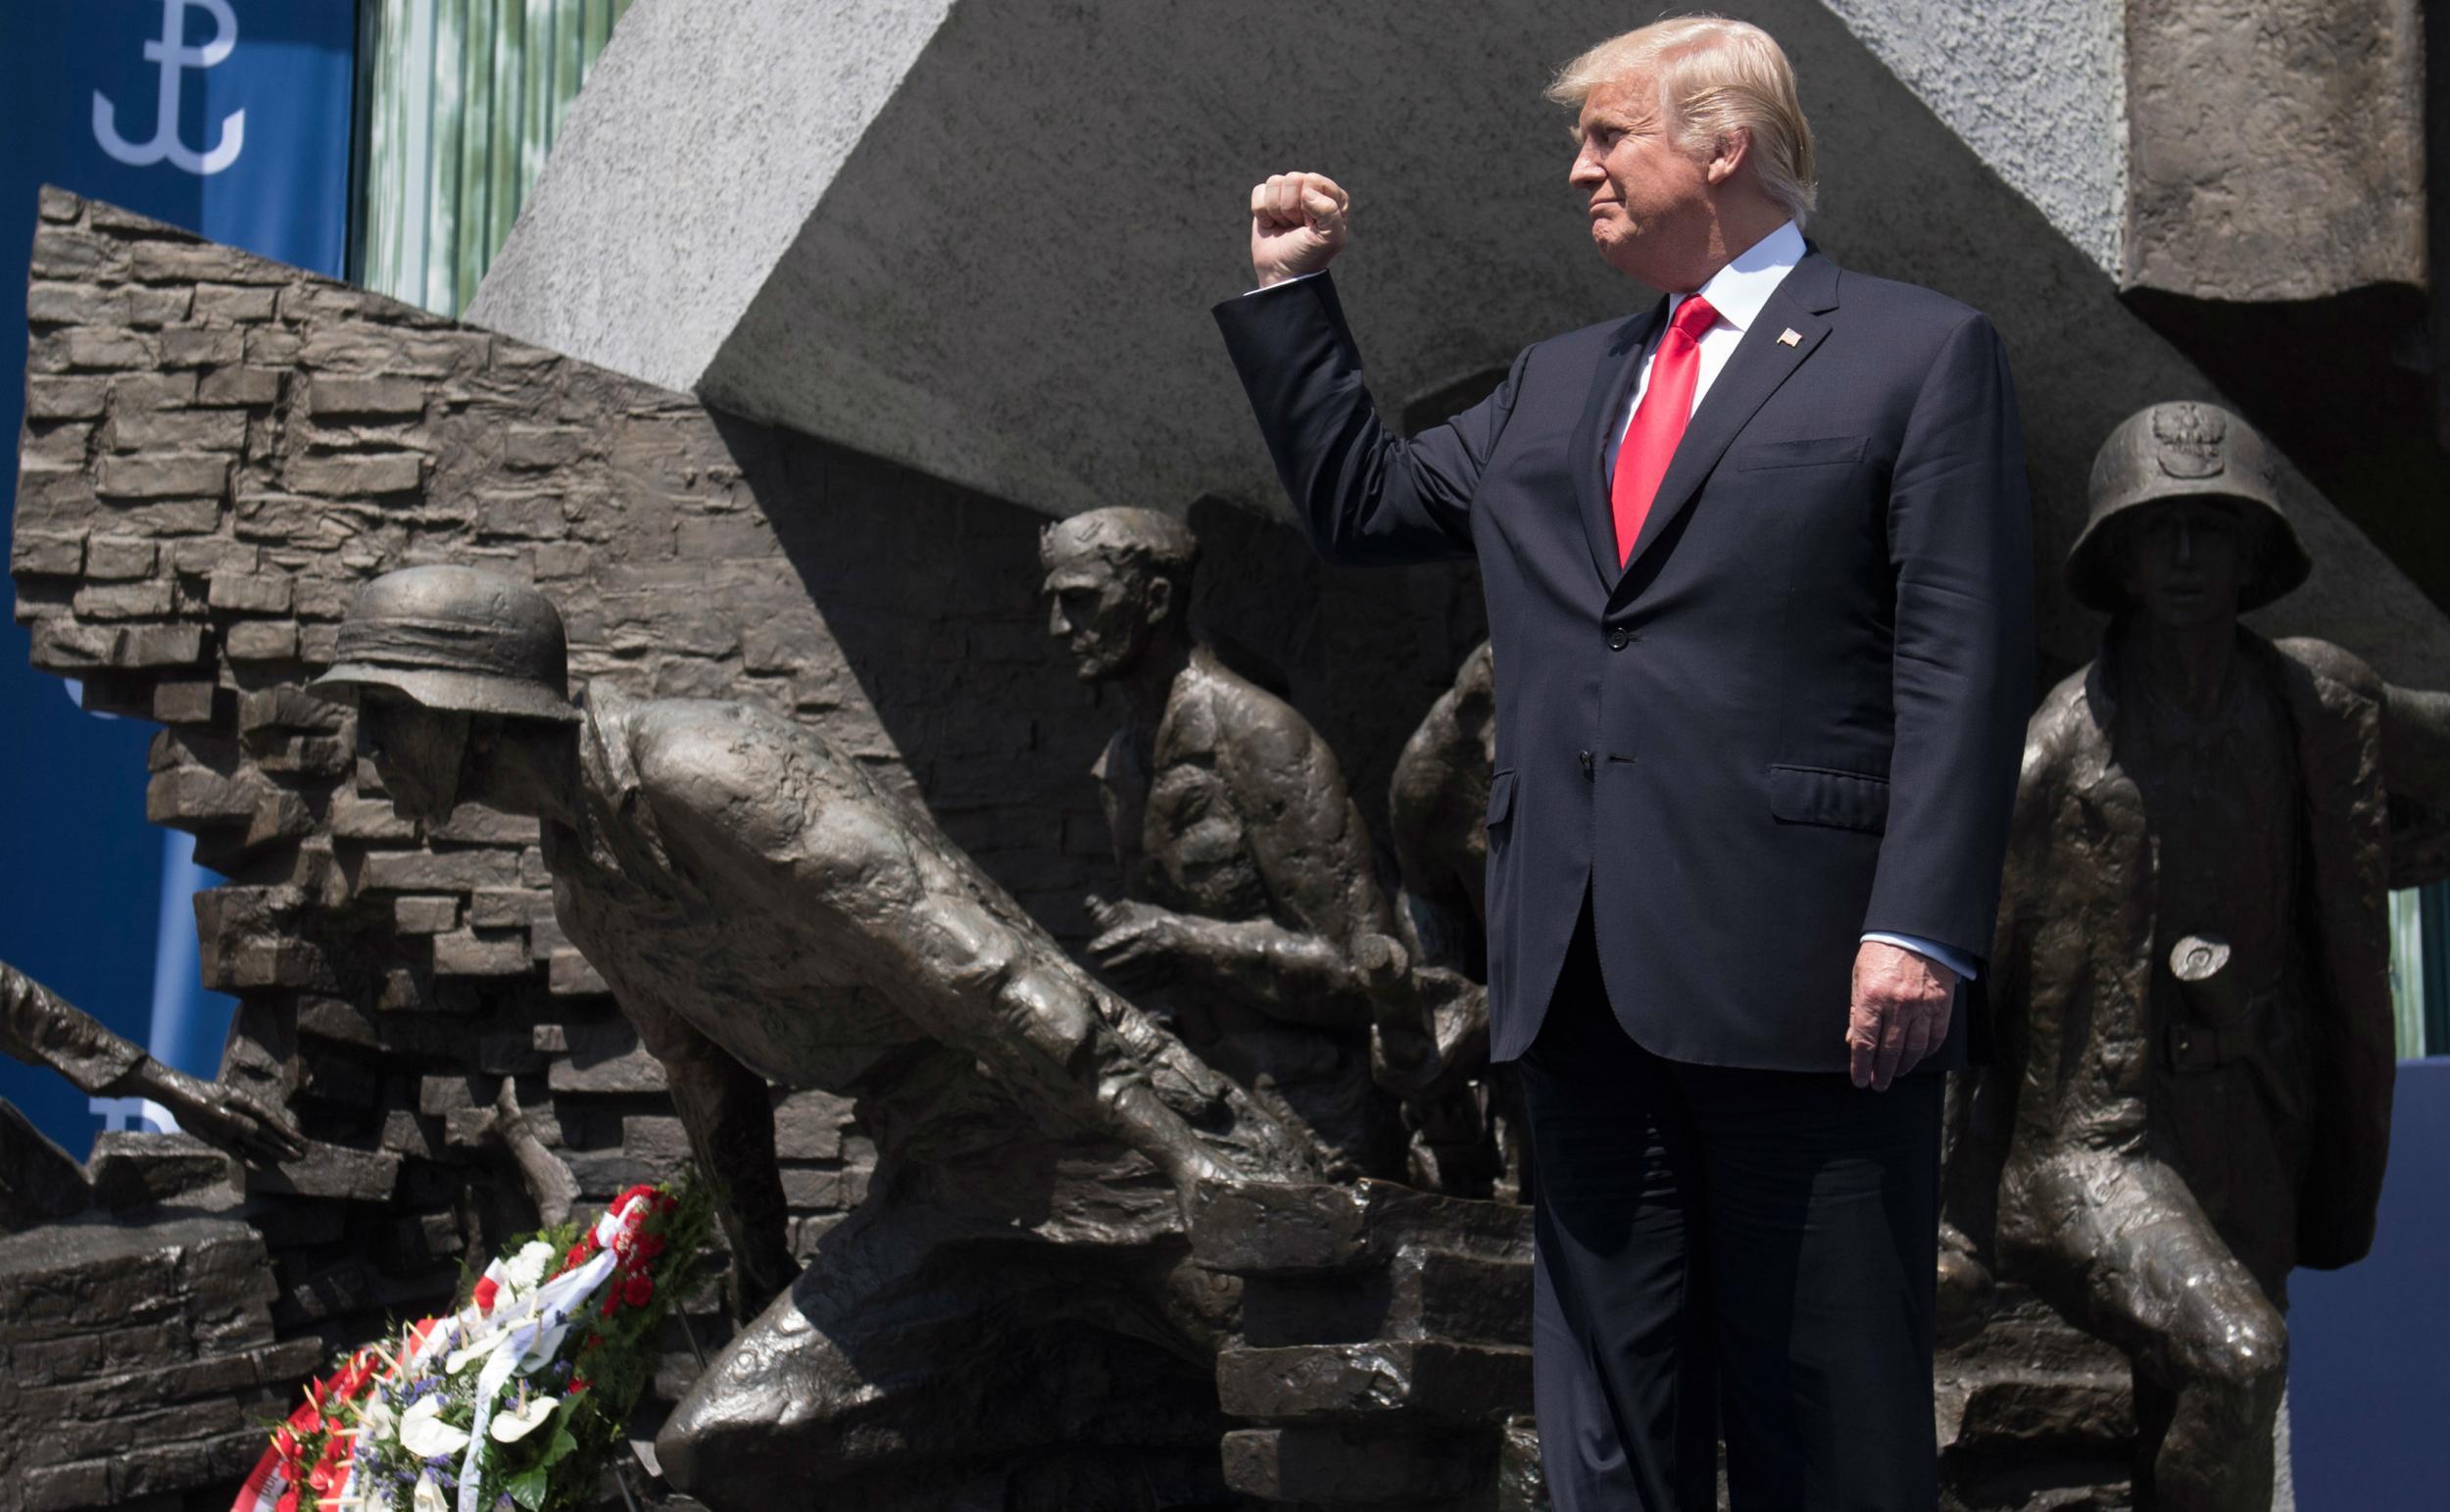 Mr Trump spoke at the site of a memorial to a 1944 uprising against Nazi occupation